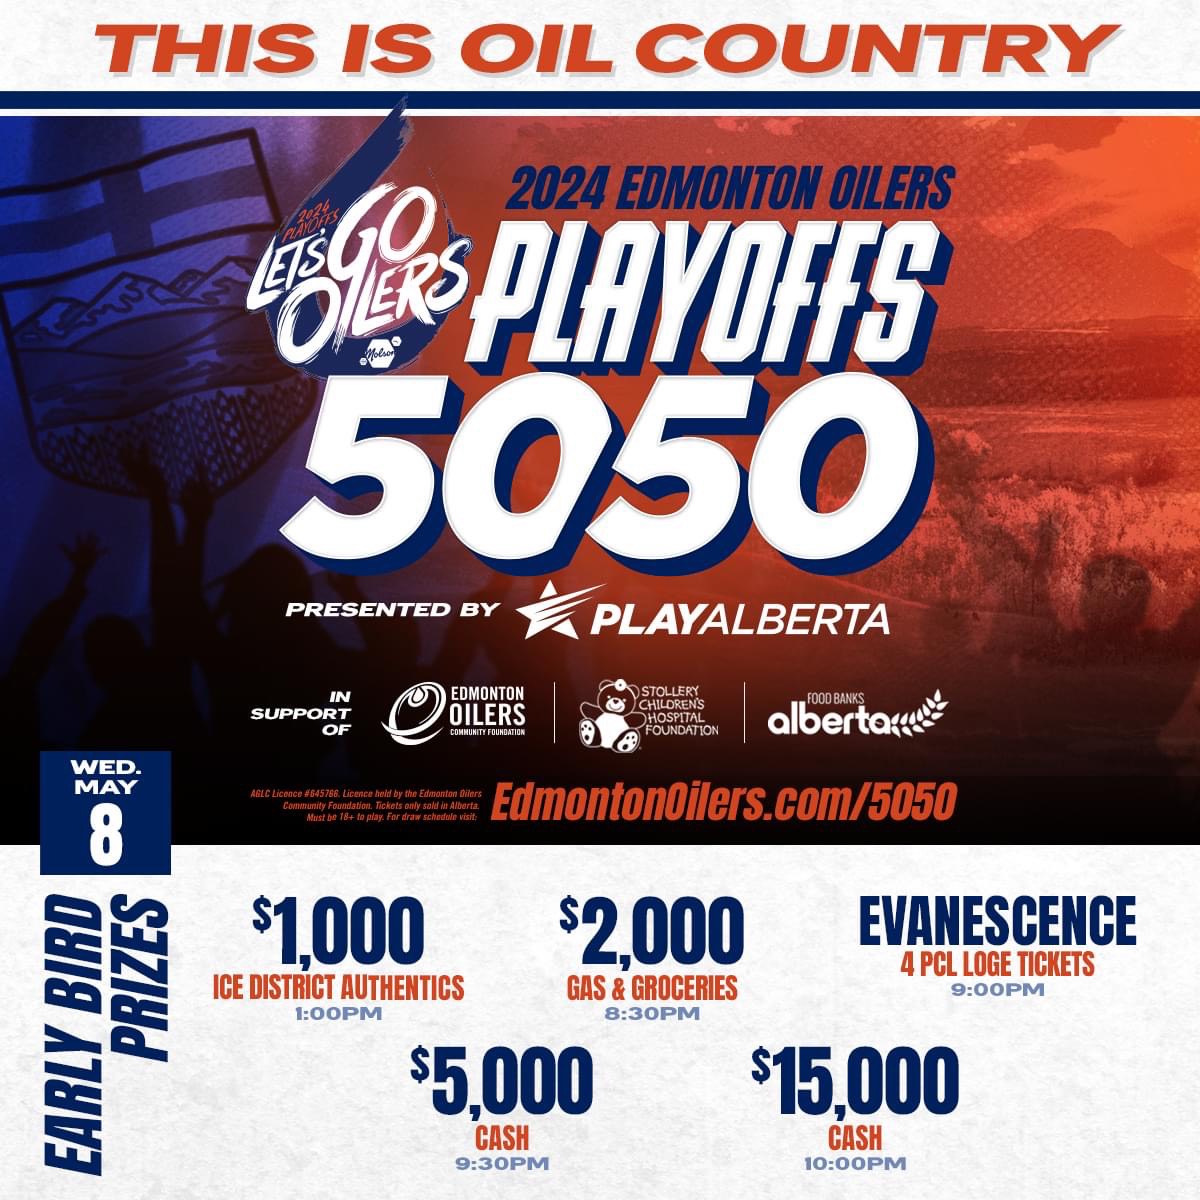 The 'This is Oil Country' #Oilers Playoffs 50/50 raffle is on now throughout Round 2. Support families across #OilCountry, including Sport Central through @Oil_Foundation! Plus, a chance to win one of 18 early bird prizes! Get tix here: nhl.com/oilers/communi… #LetsGoOilers